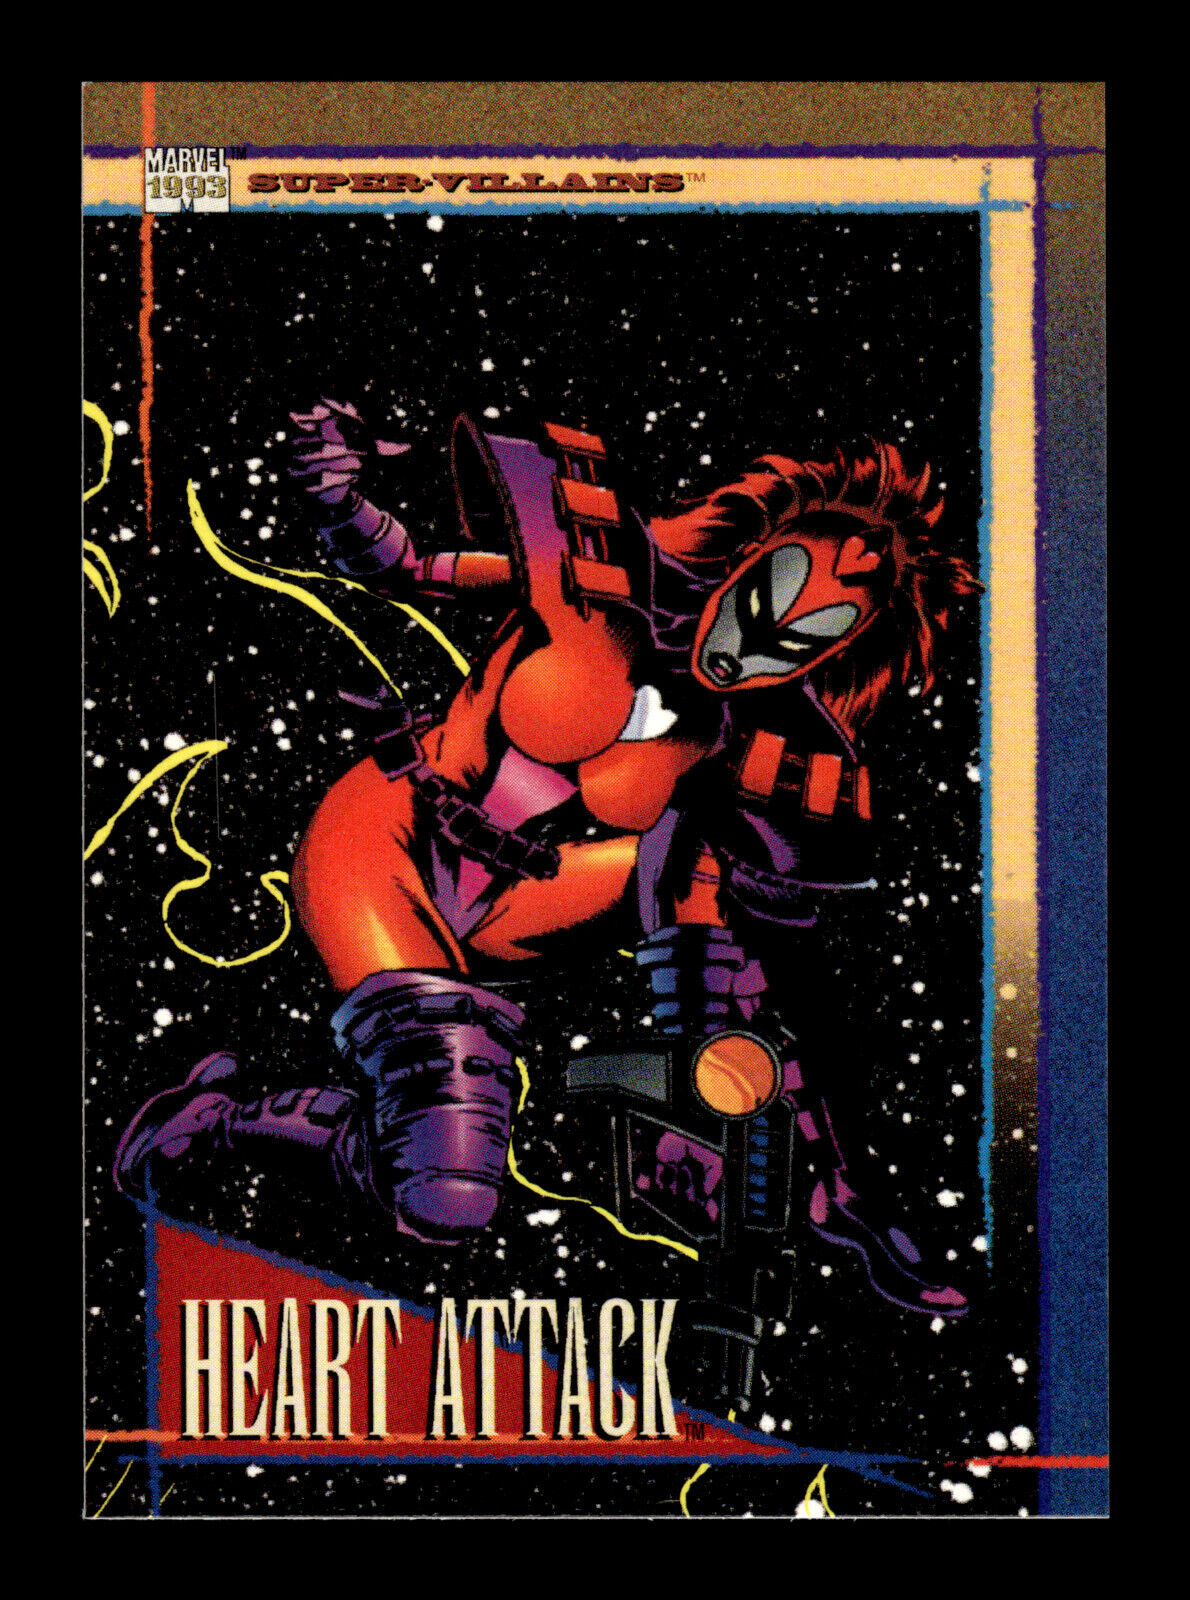 1993 SkyBox Marvel Universe Trading Card - Heart Attack #102